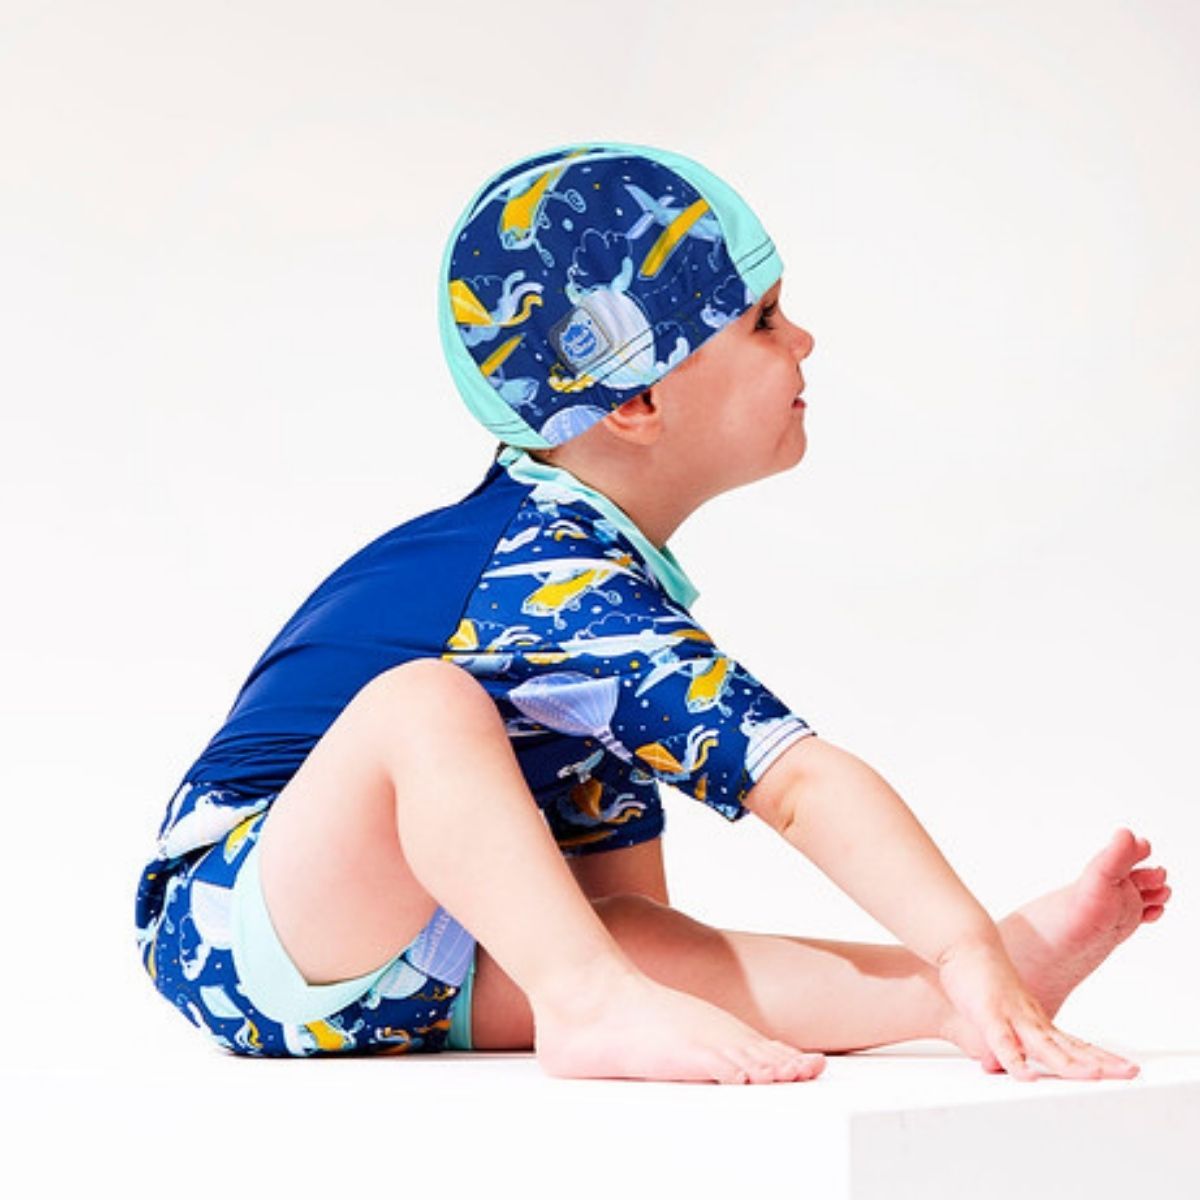 Toddler wearing  swim hat in blue with light green trims and sky themed print, including airplanes, kites, clouds, hot air balloons and more. He's also wearing matching rash top and Happy Nappy.